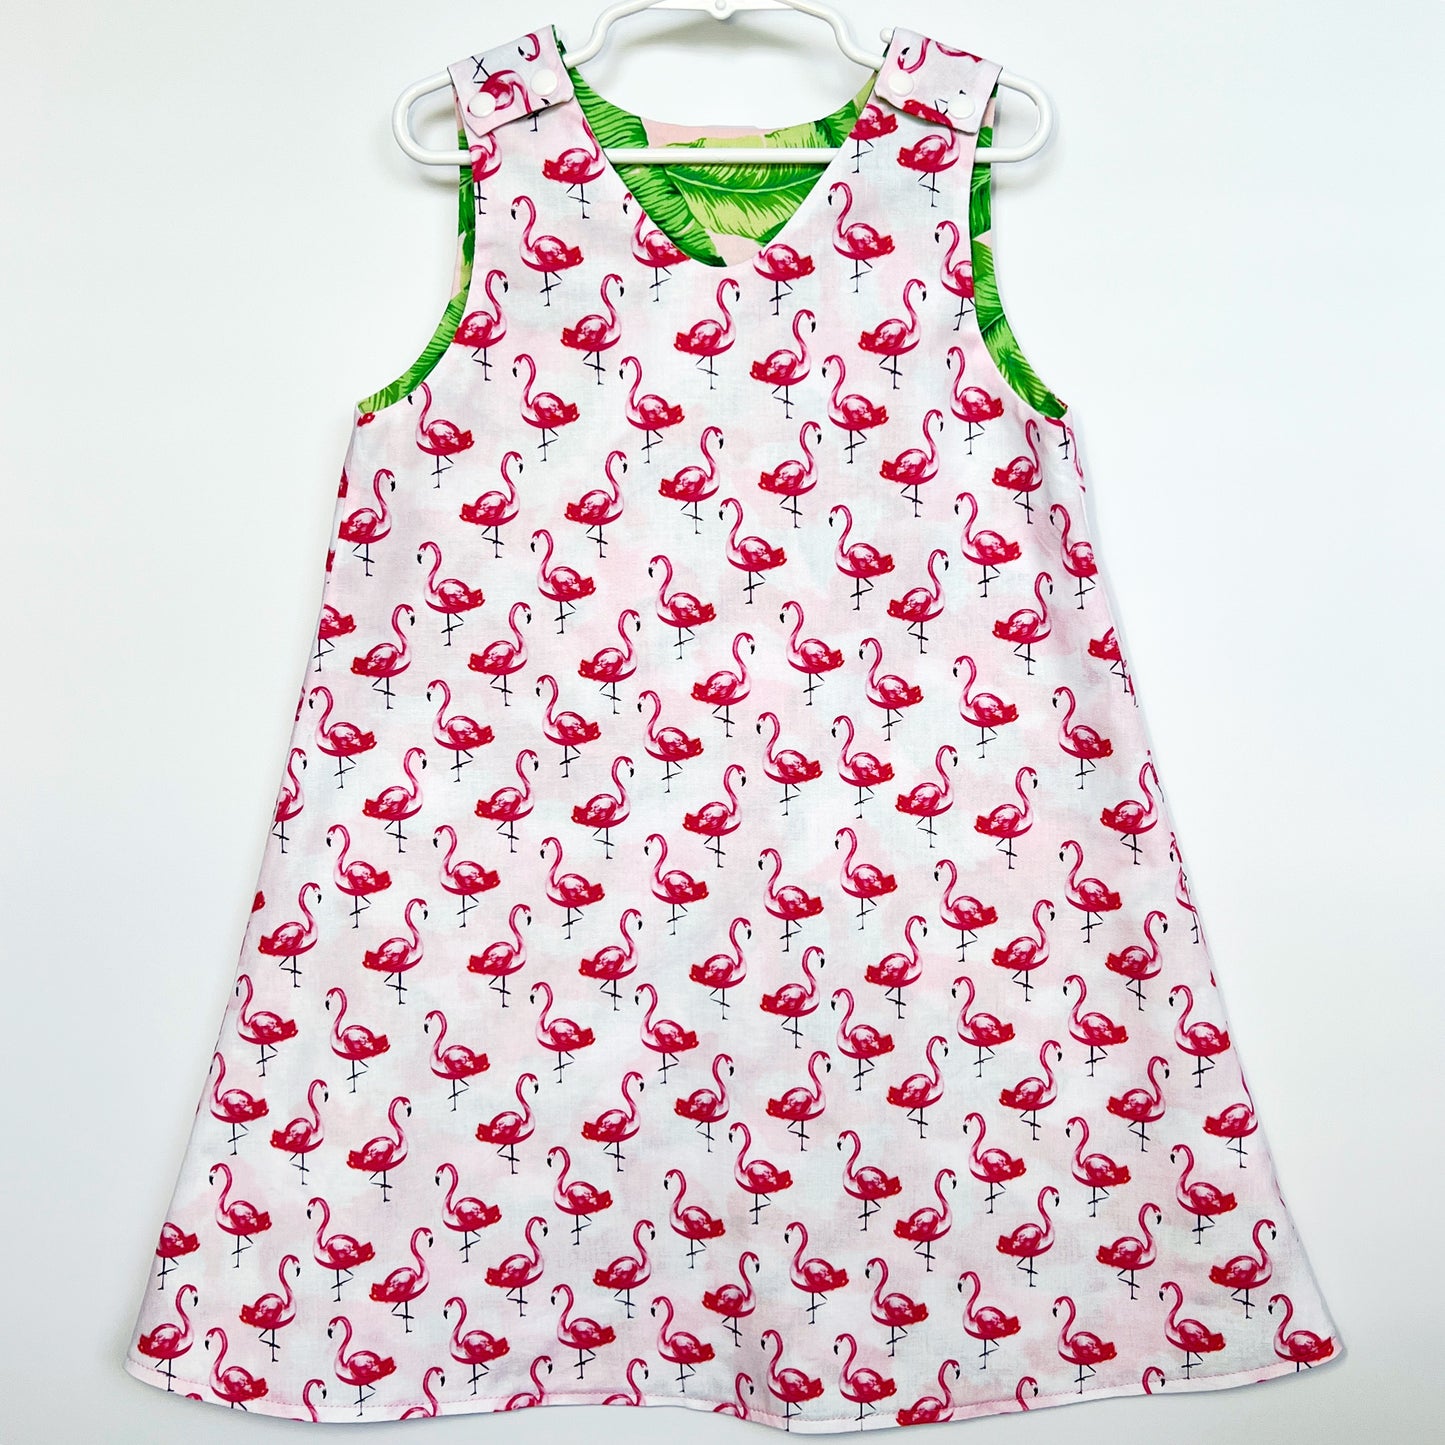 A-line reversible cotton dress "Flamingos and Tropical leaves "